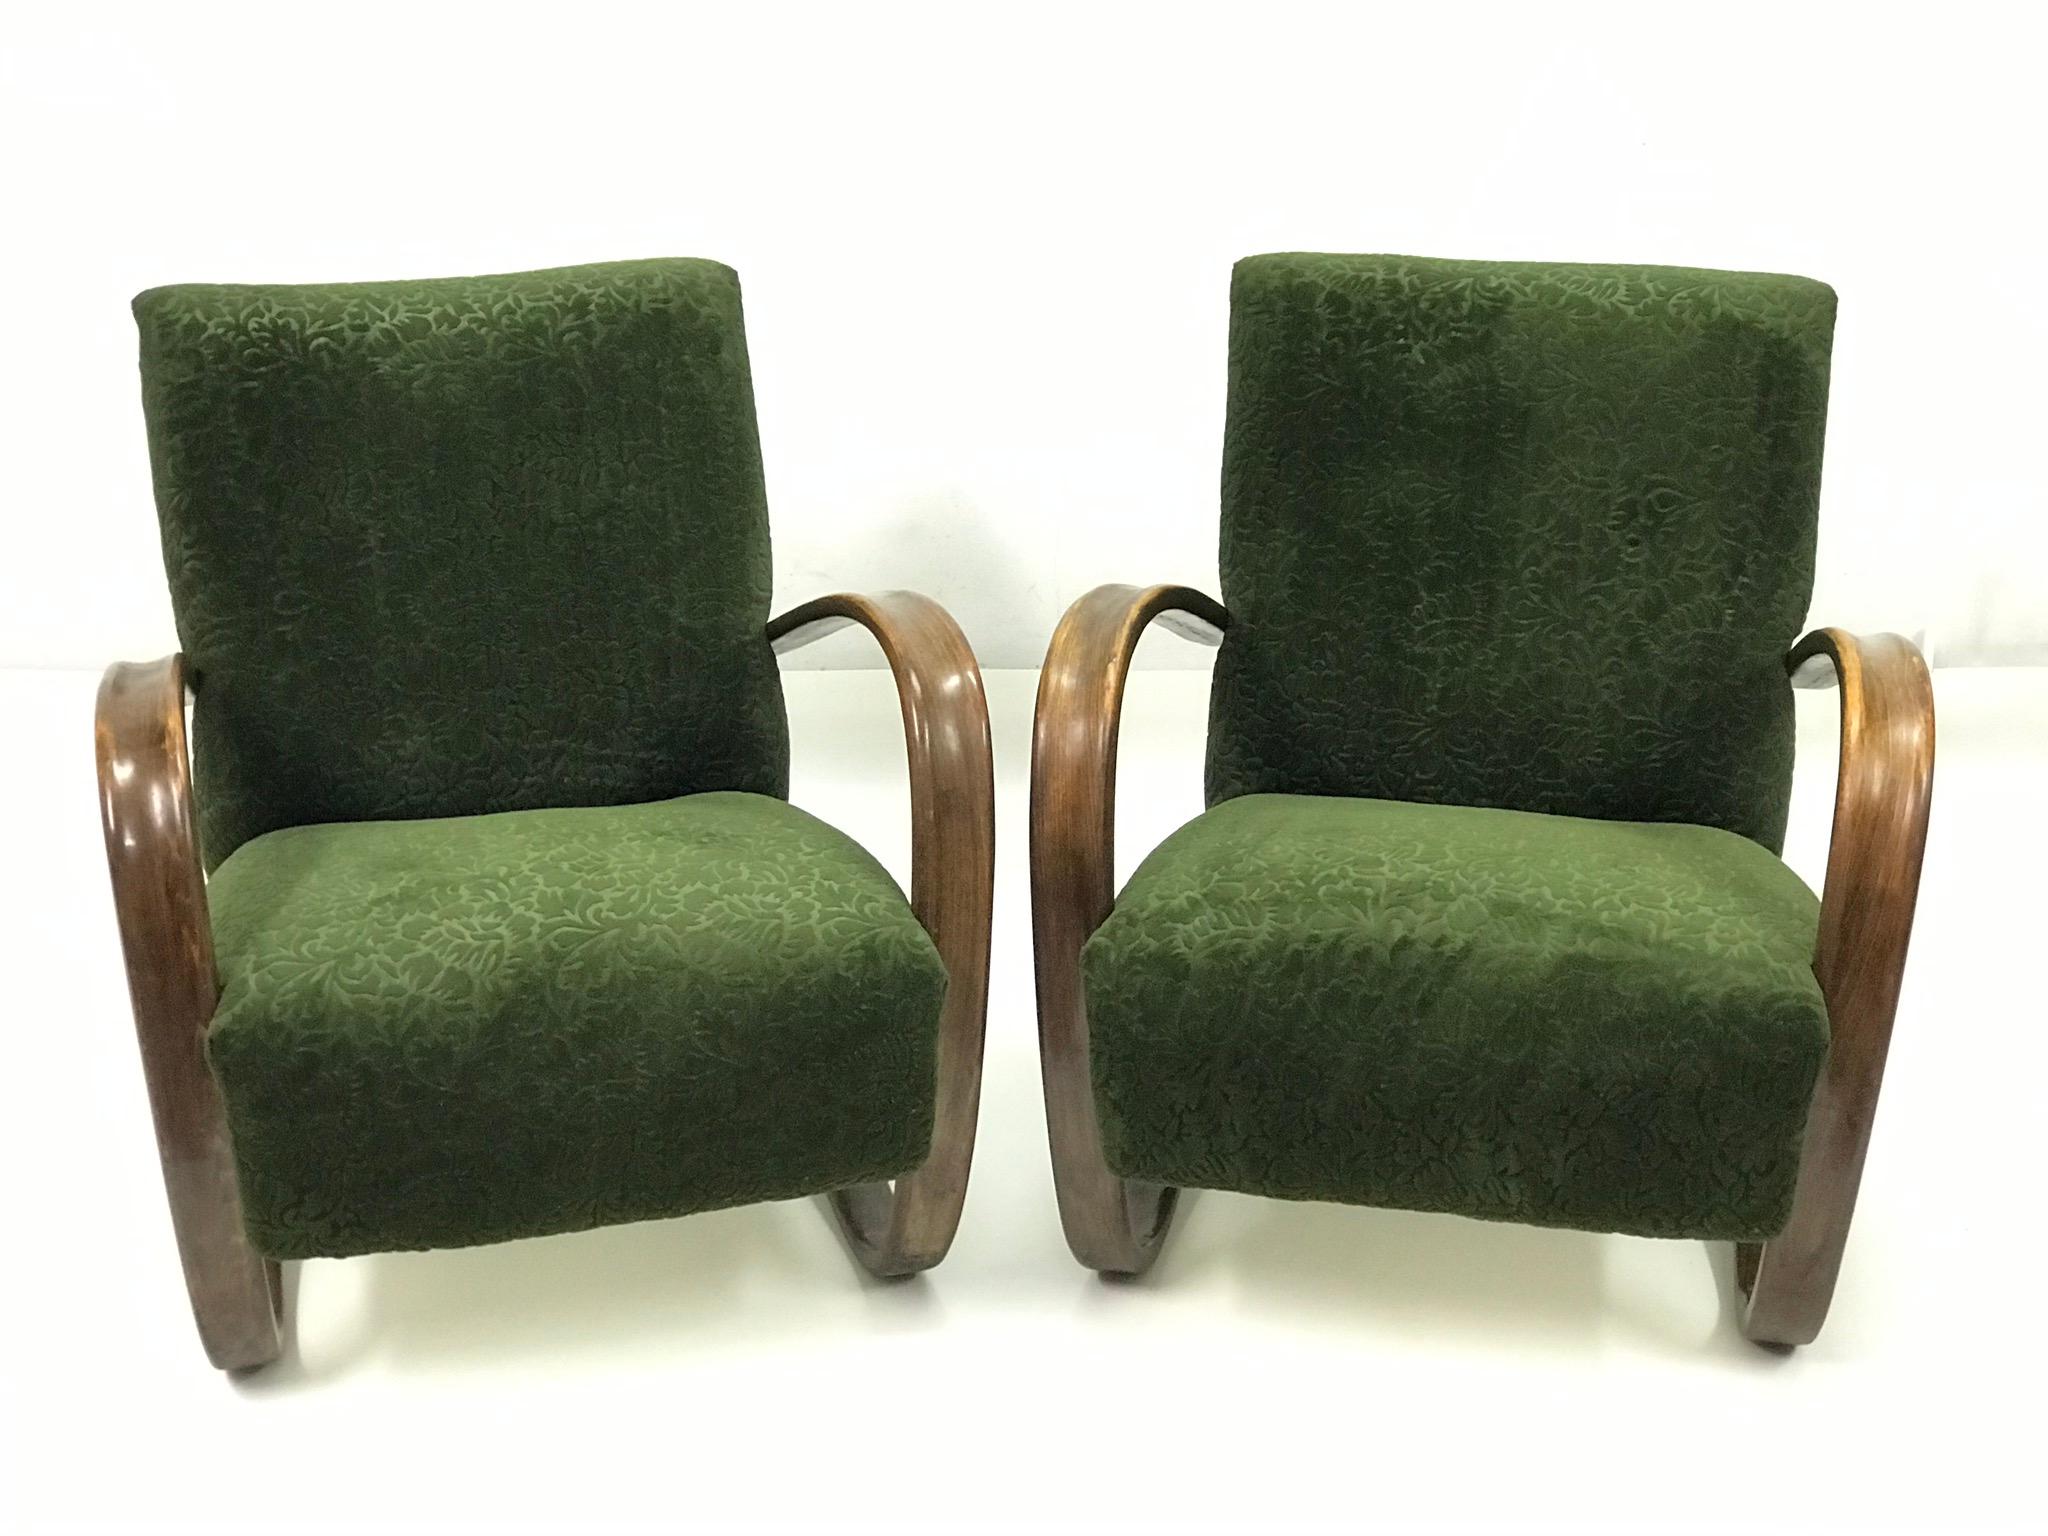 The armchairs are very nice condition, construction is original wood color, stable. The armchairs were upholster in 90 ages but not professional (viz foto). The textile is not demage therefore they are immediately usable.